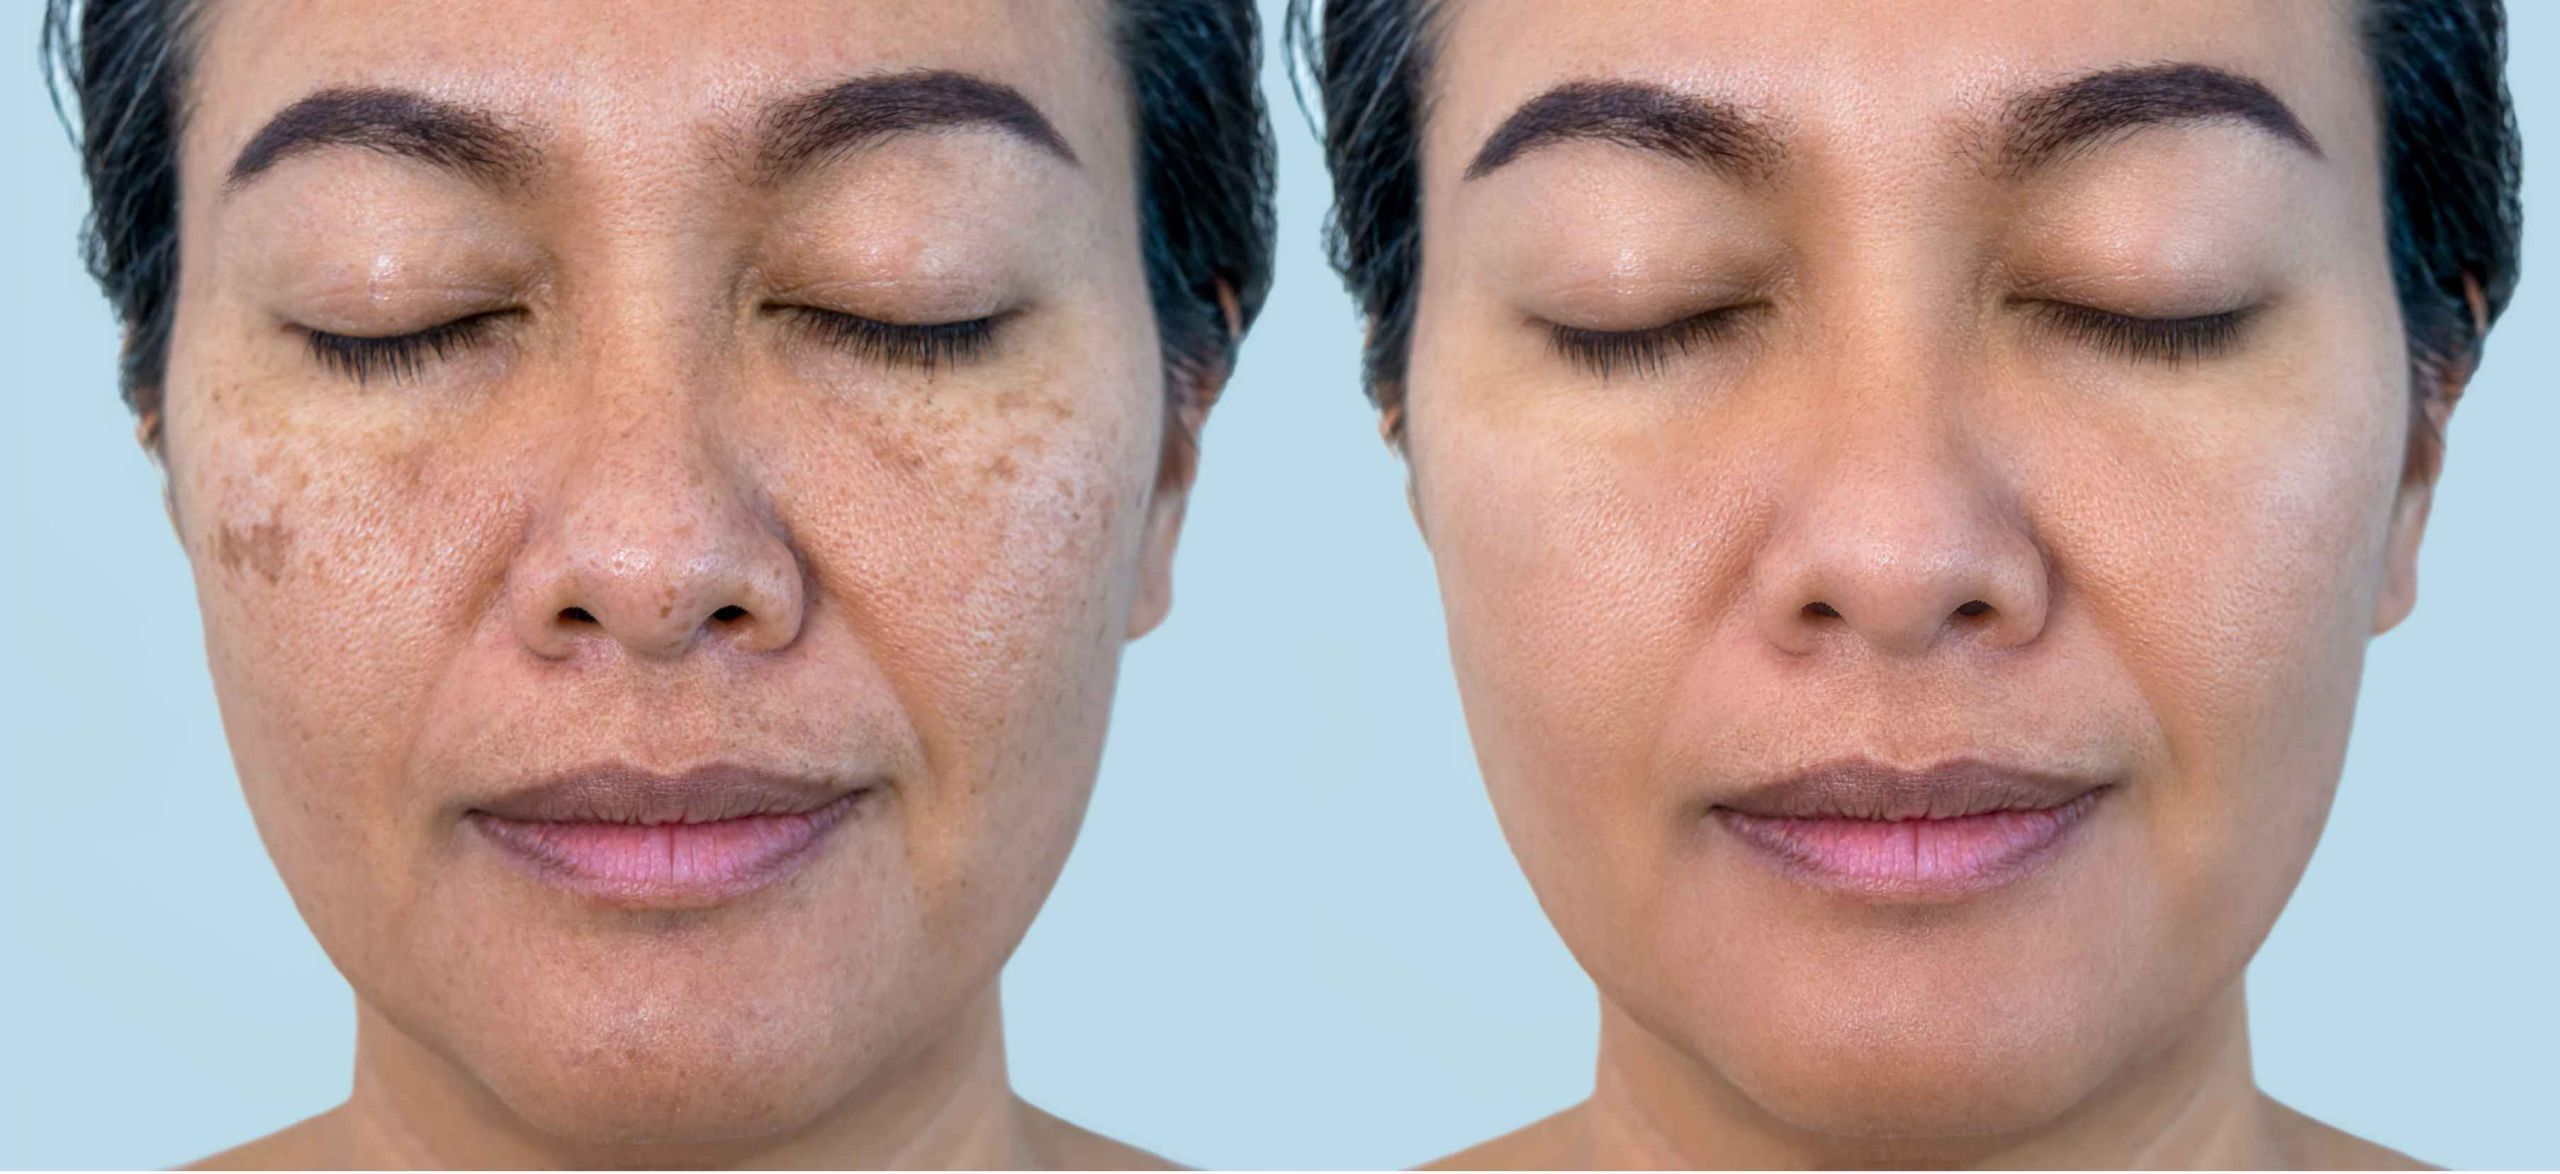 Melasma is the most common cause of dark pigmentation, hence the nickname, Melasma Mustache. An increase or fluctuation of estrogen and progesterone can trigger pigment-producing cells that heighten melanin in areas like your face exposed to the sun.